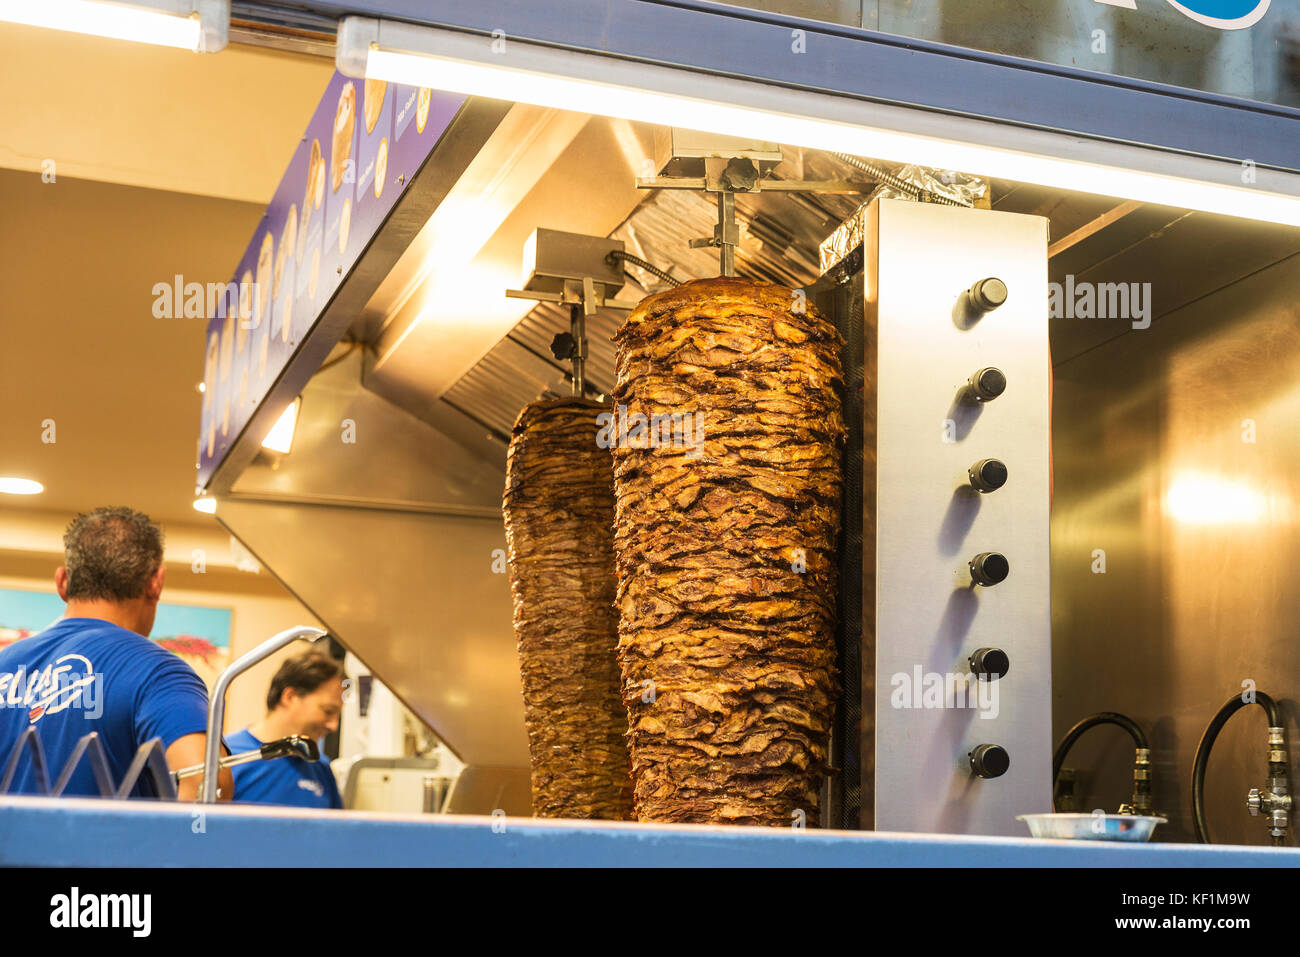 Brussels, Belgium - August 26, 2017: Kitchen of a Doner kebap with rolls of mutton or chicken and waiters in Brussels, Belgium Stock Photo